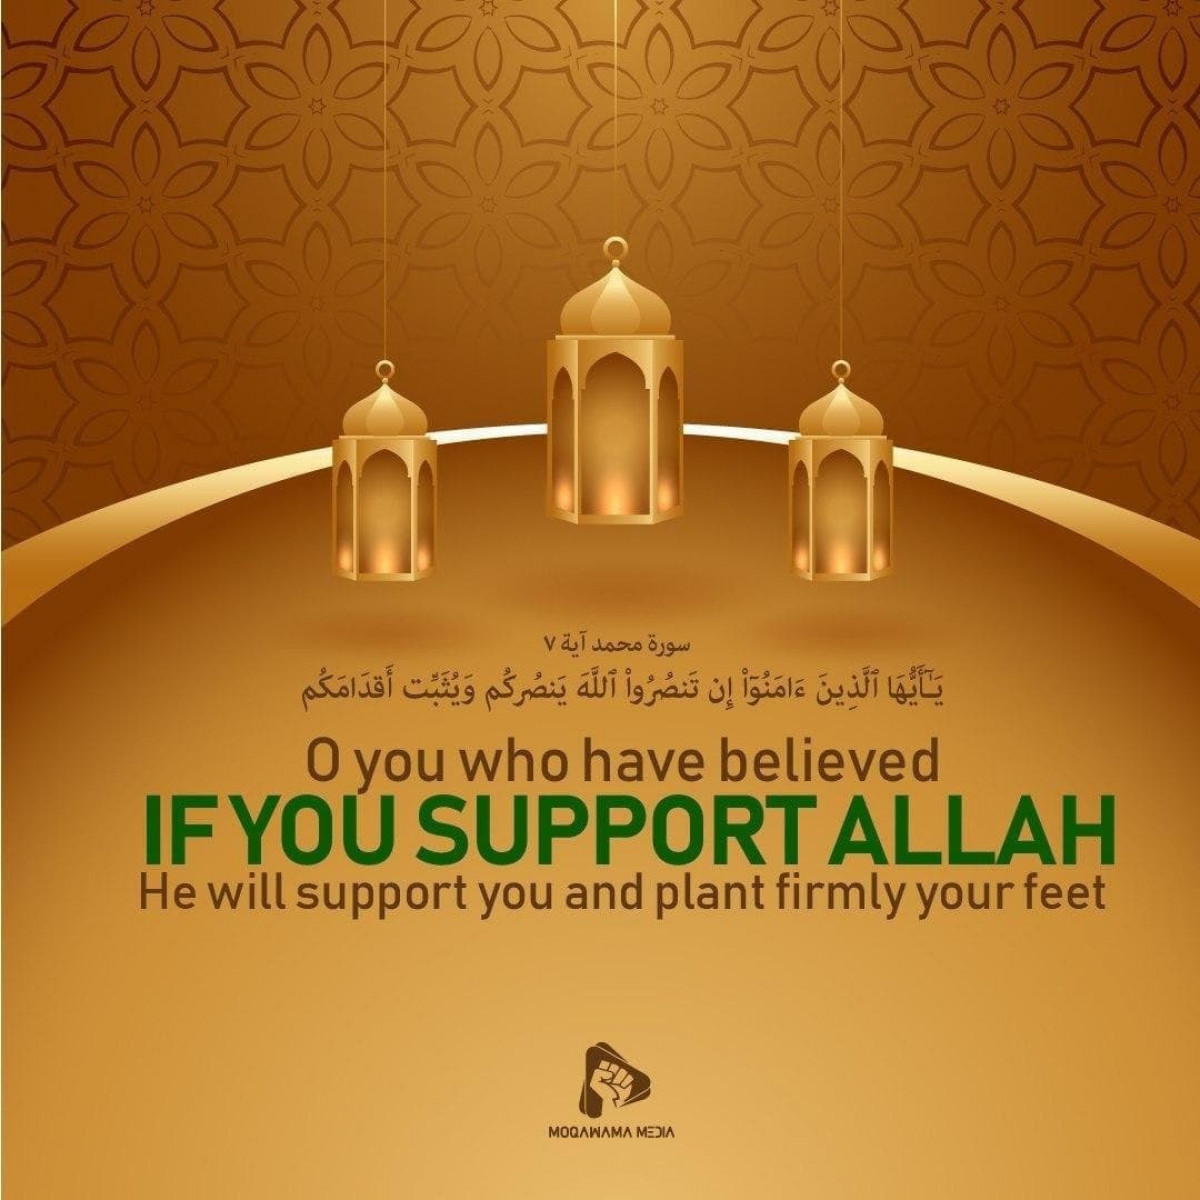 O You who have believed "If you support Allah" He will support you and plant firmly your feet.